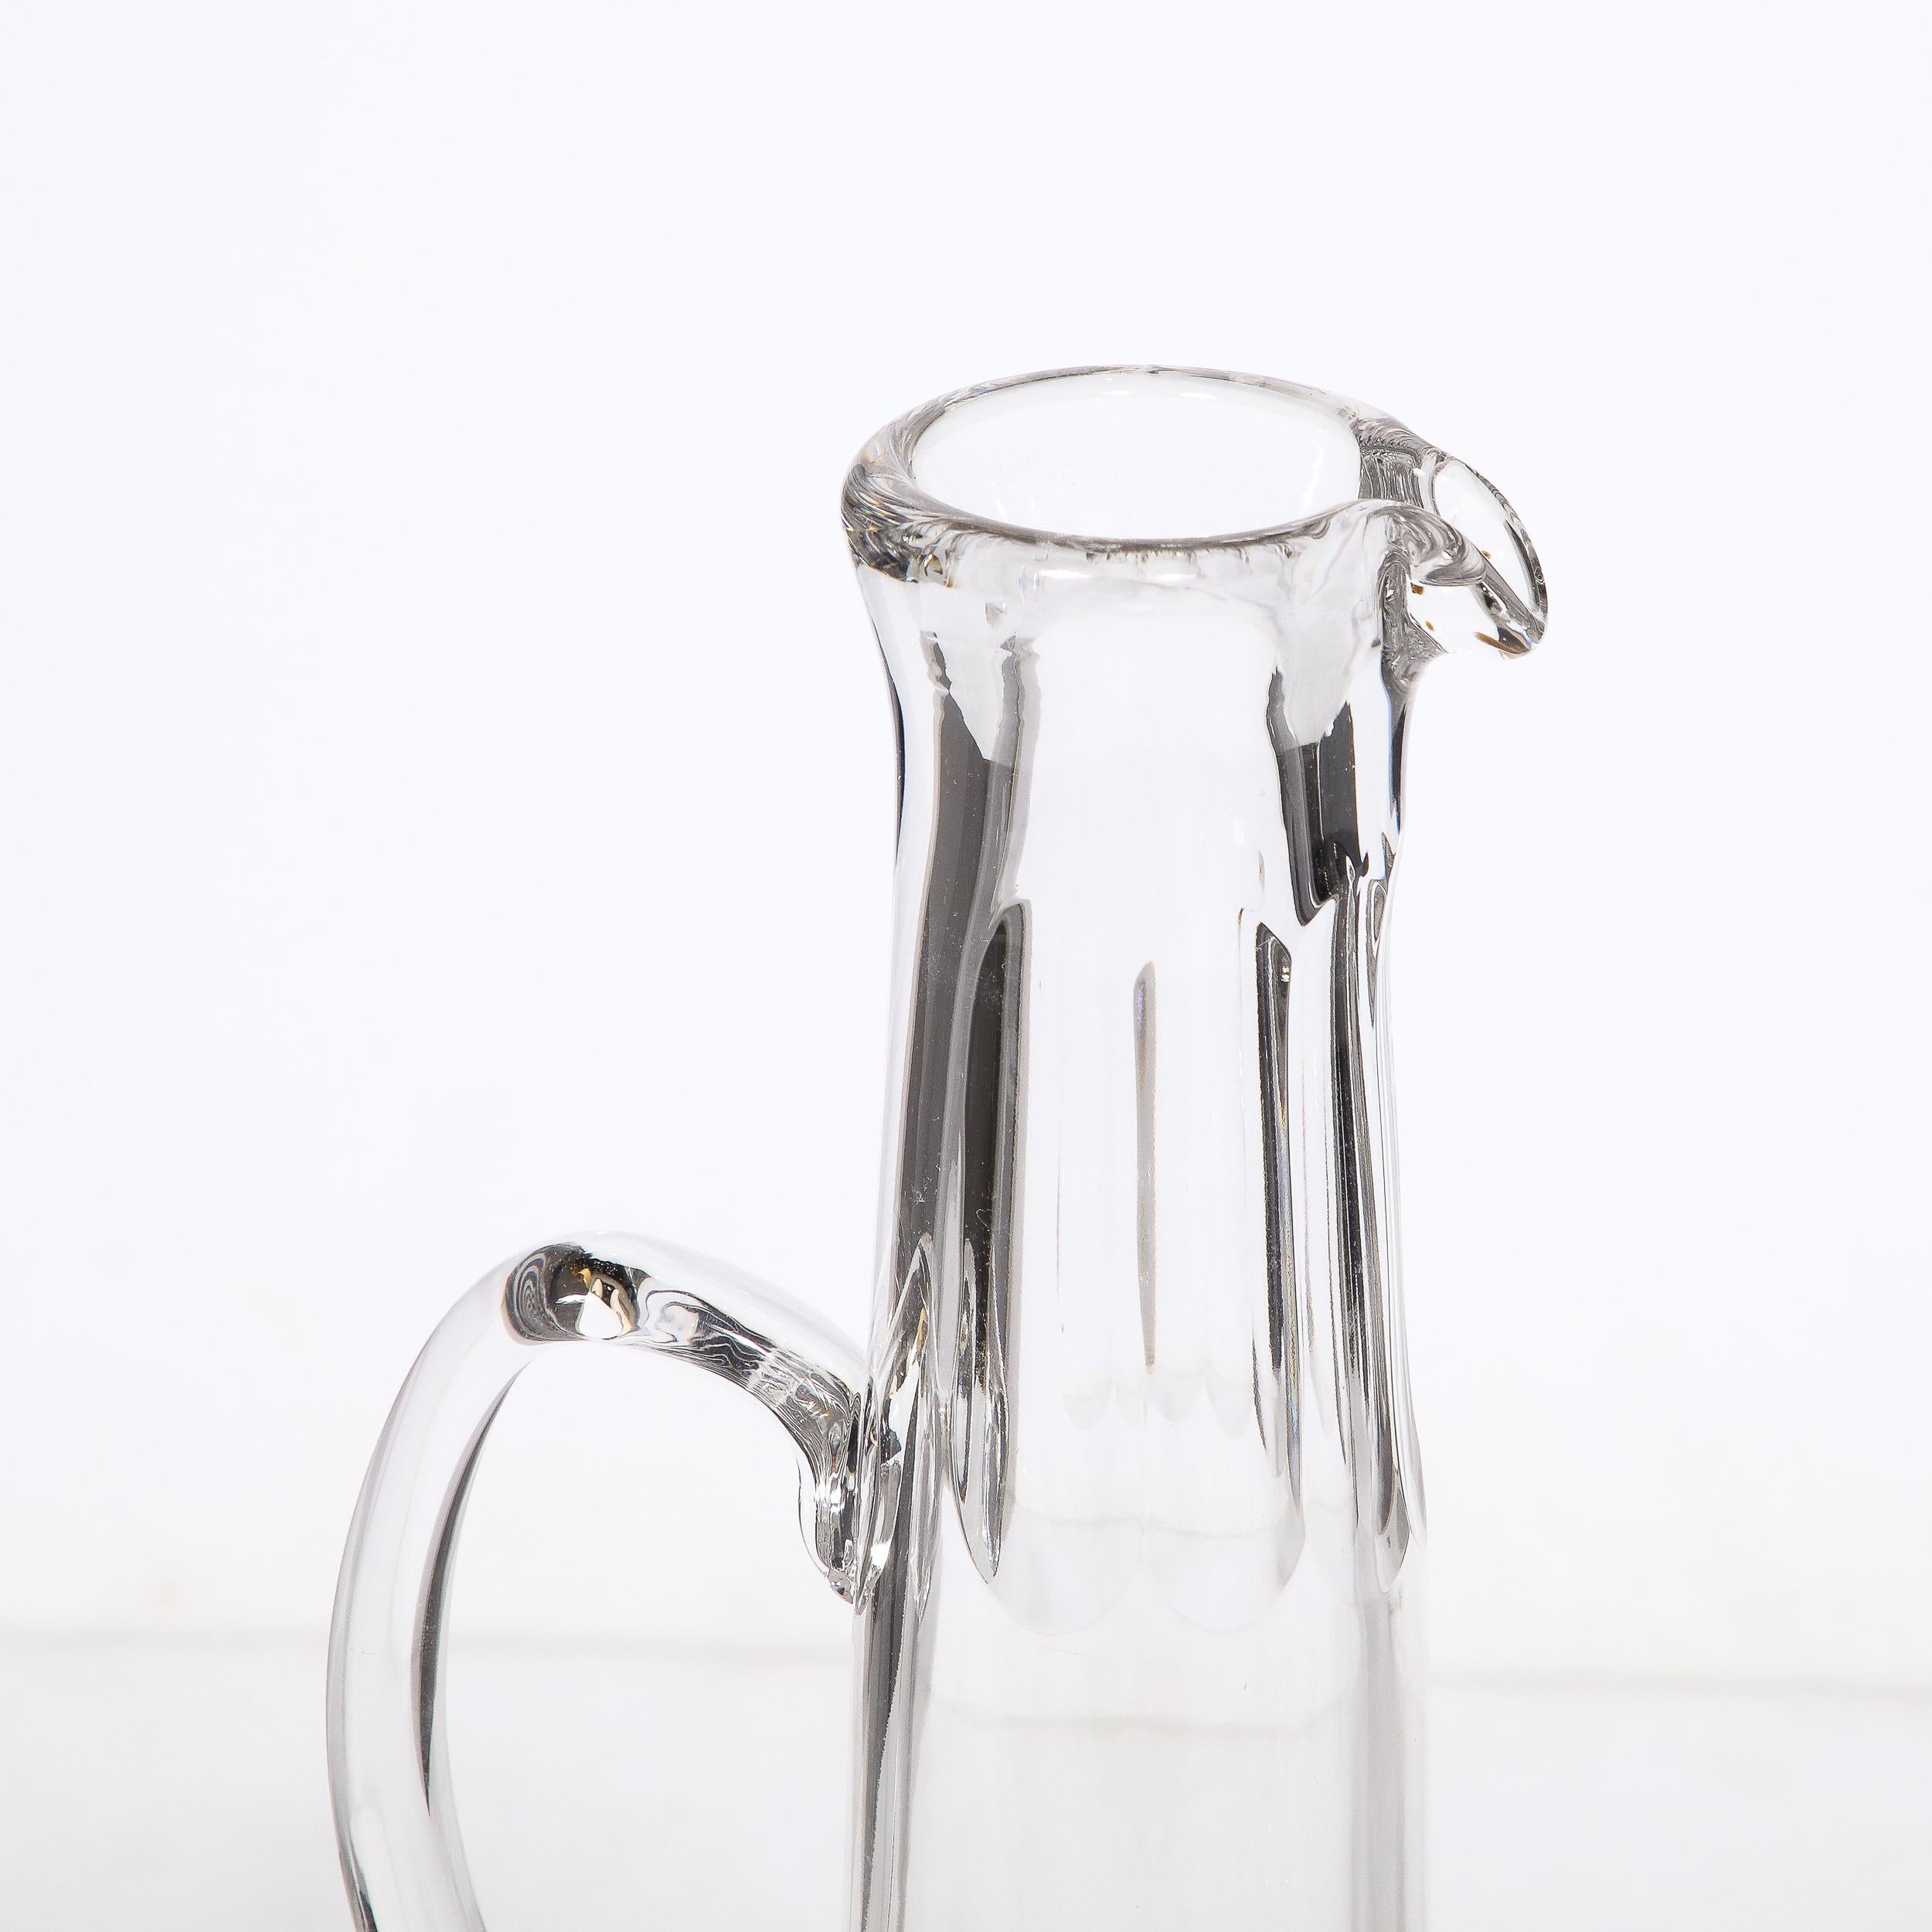 This elegant and beautifully made Mid-Century Modernist Champagne Pitcher entitled 